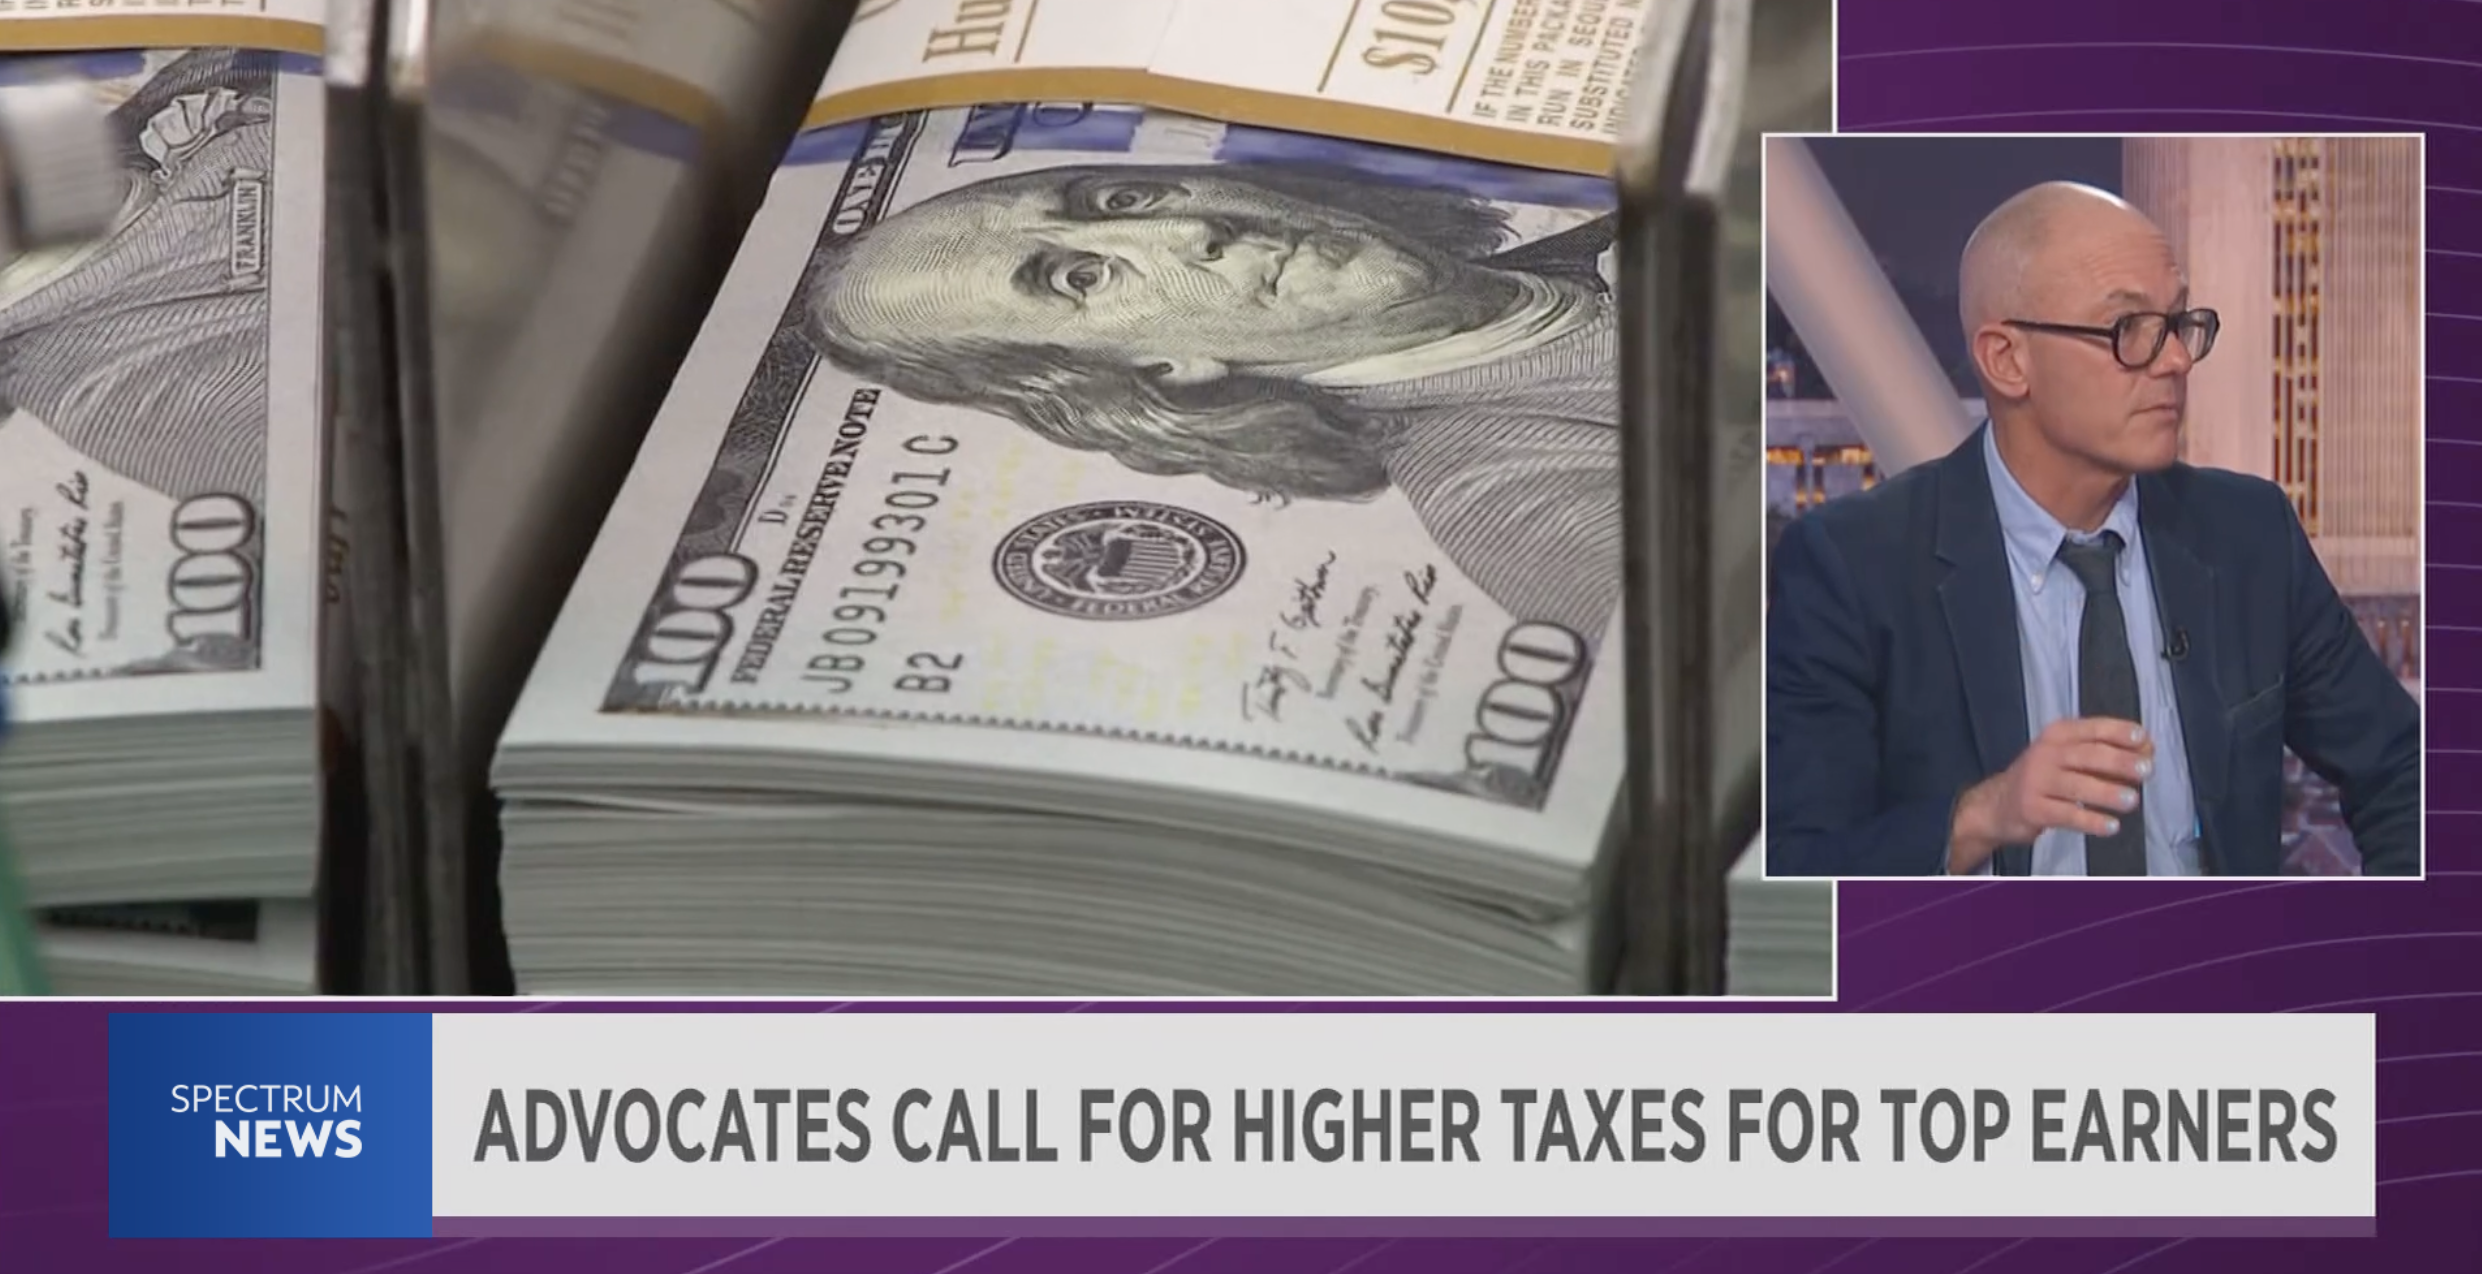 Progressive advocates call for higher taxes on high earners in New York 1